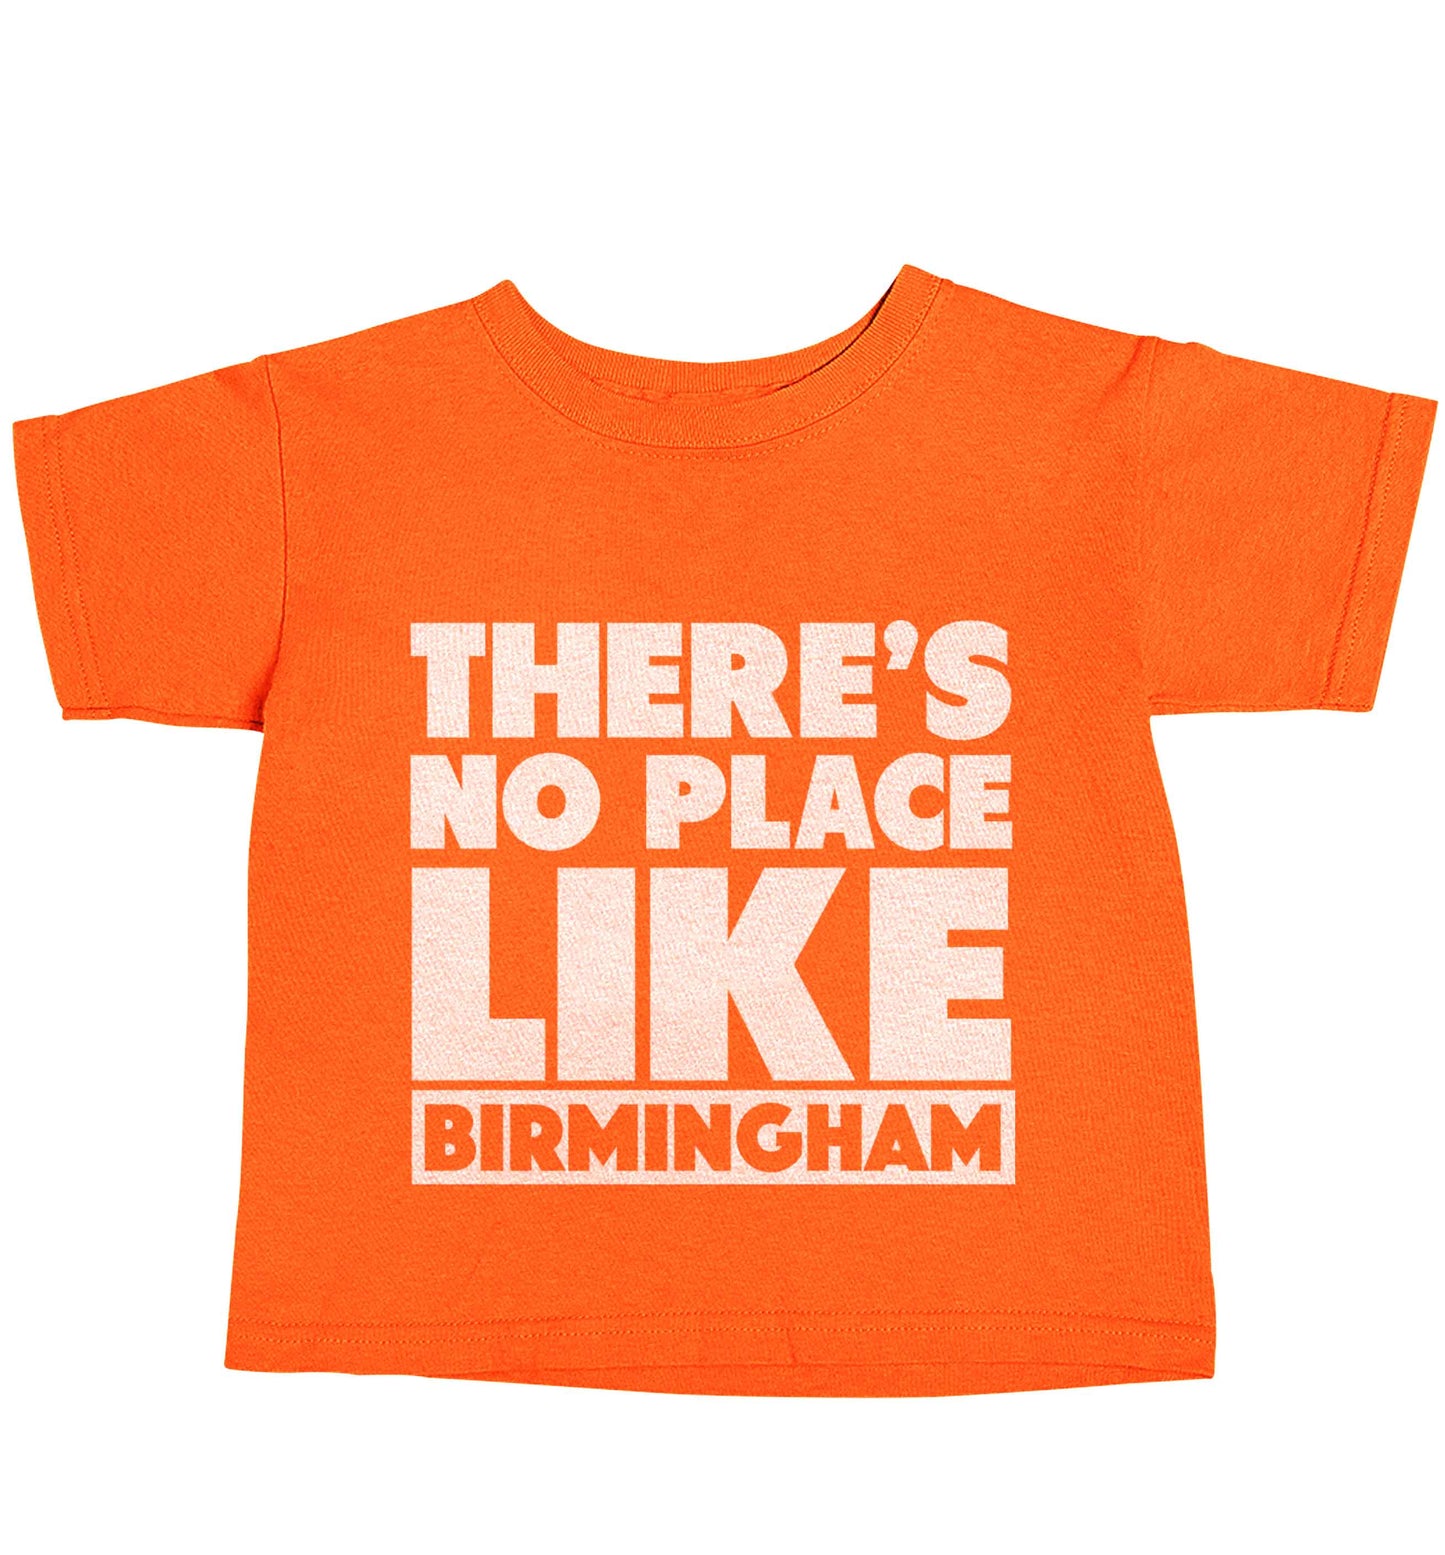 There's no place like Birmingham orange baby toddler Tshirt 2 Years